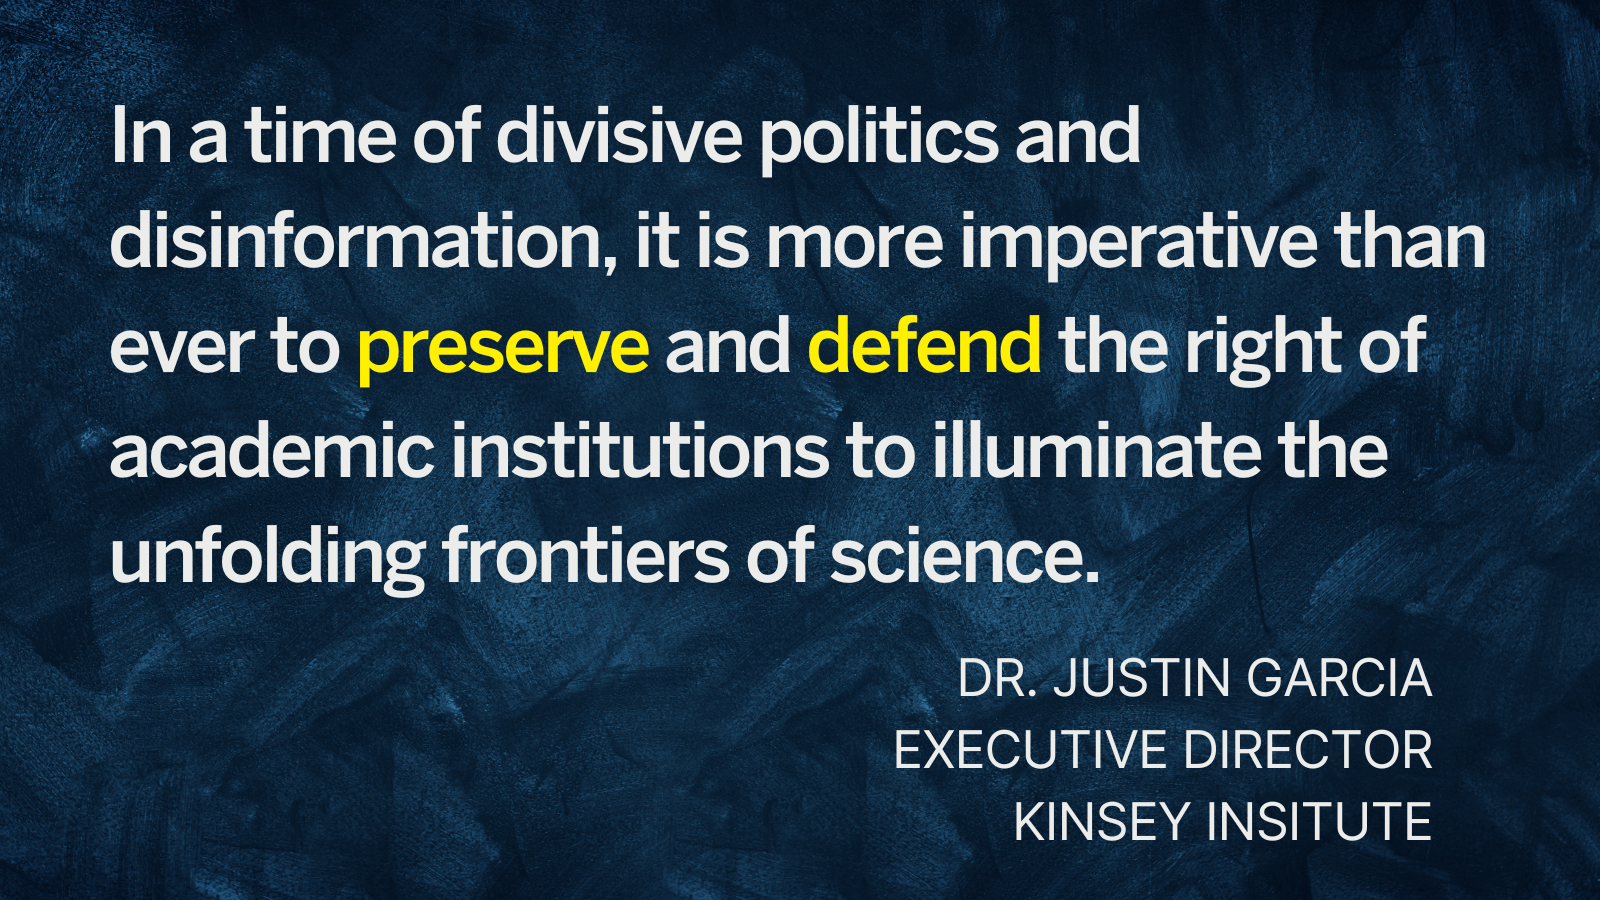 Dr. Justin Garcia quote "In a time of divisive politics and disinformation, it is more imperative than ever to preserve and defend the right of academic institutions to illuminate the unfolding frontiers of science."